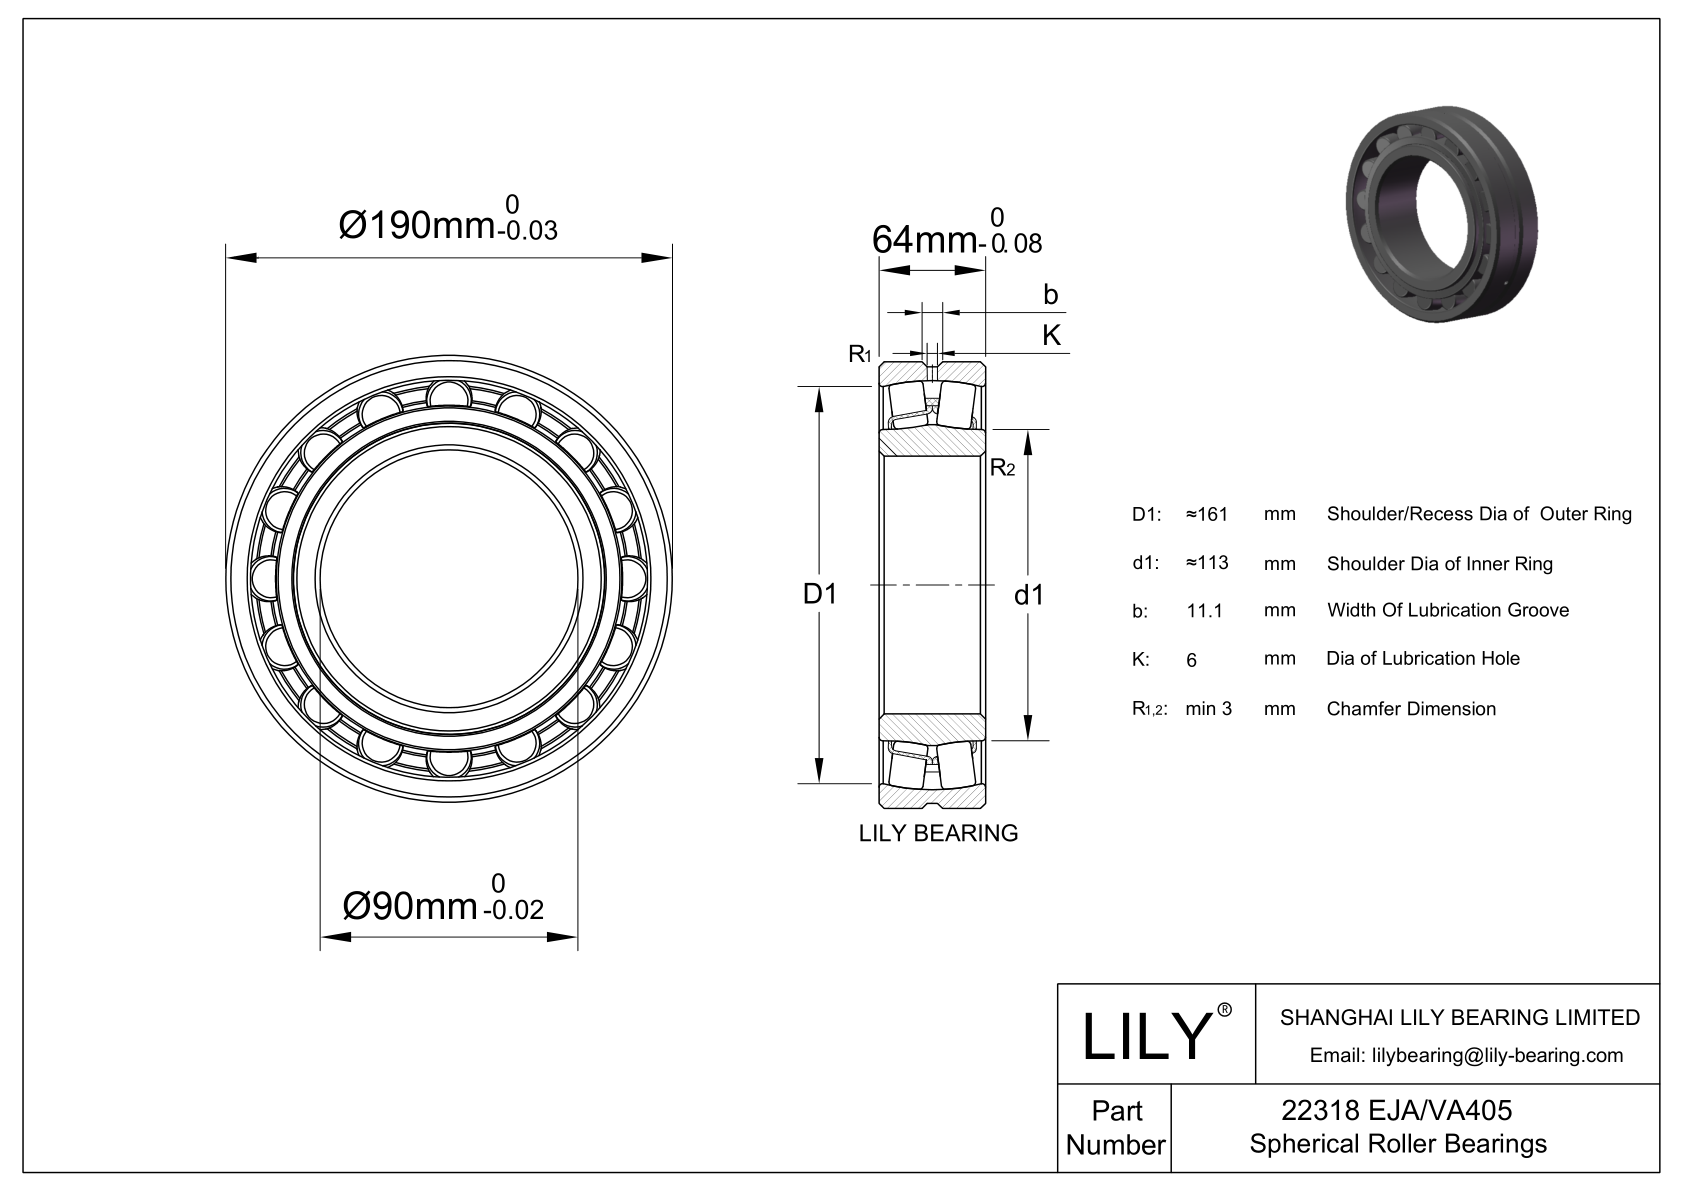 22318 EJA/VA405 Double Row Spherical Roller Bearing cad drawing